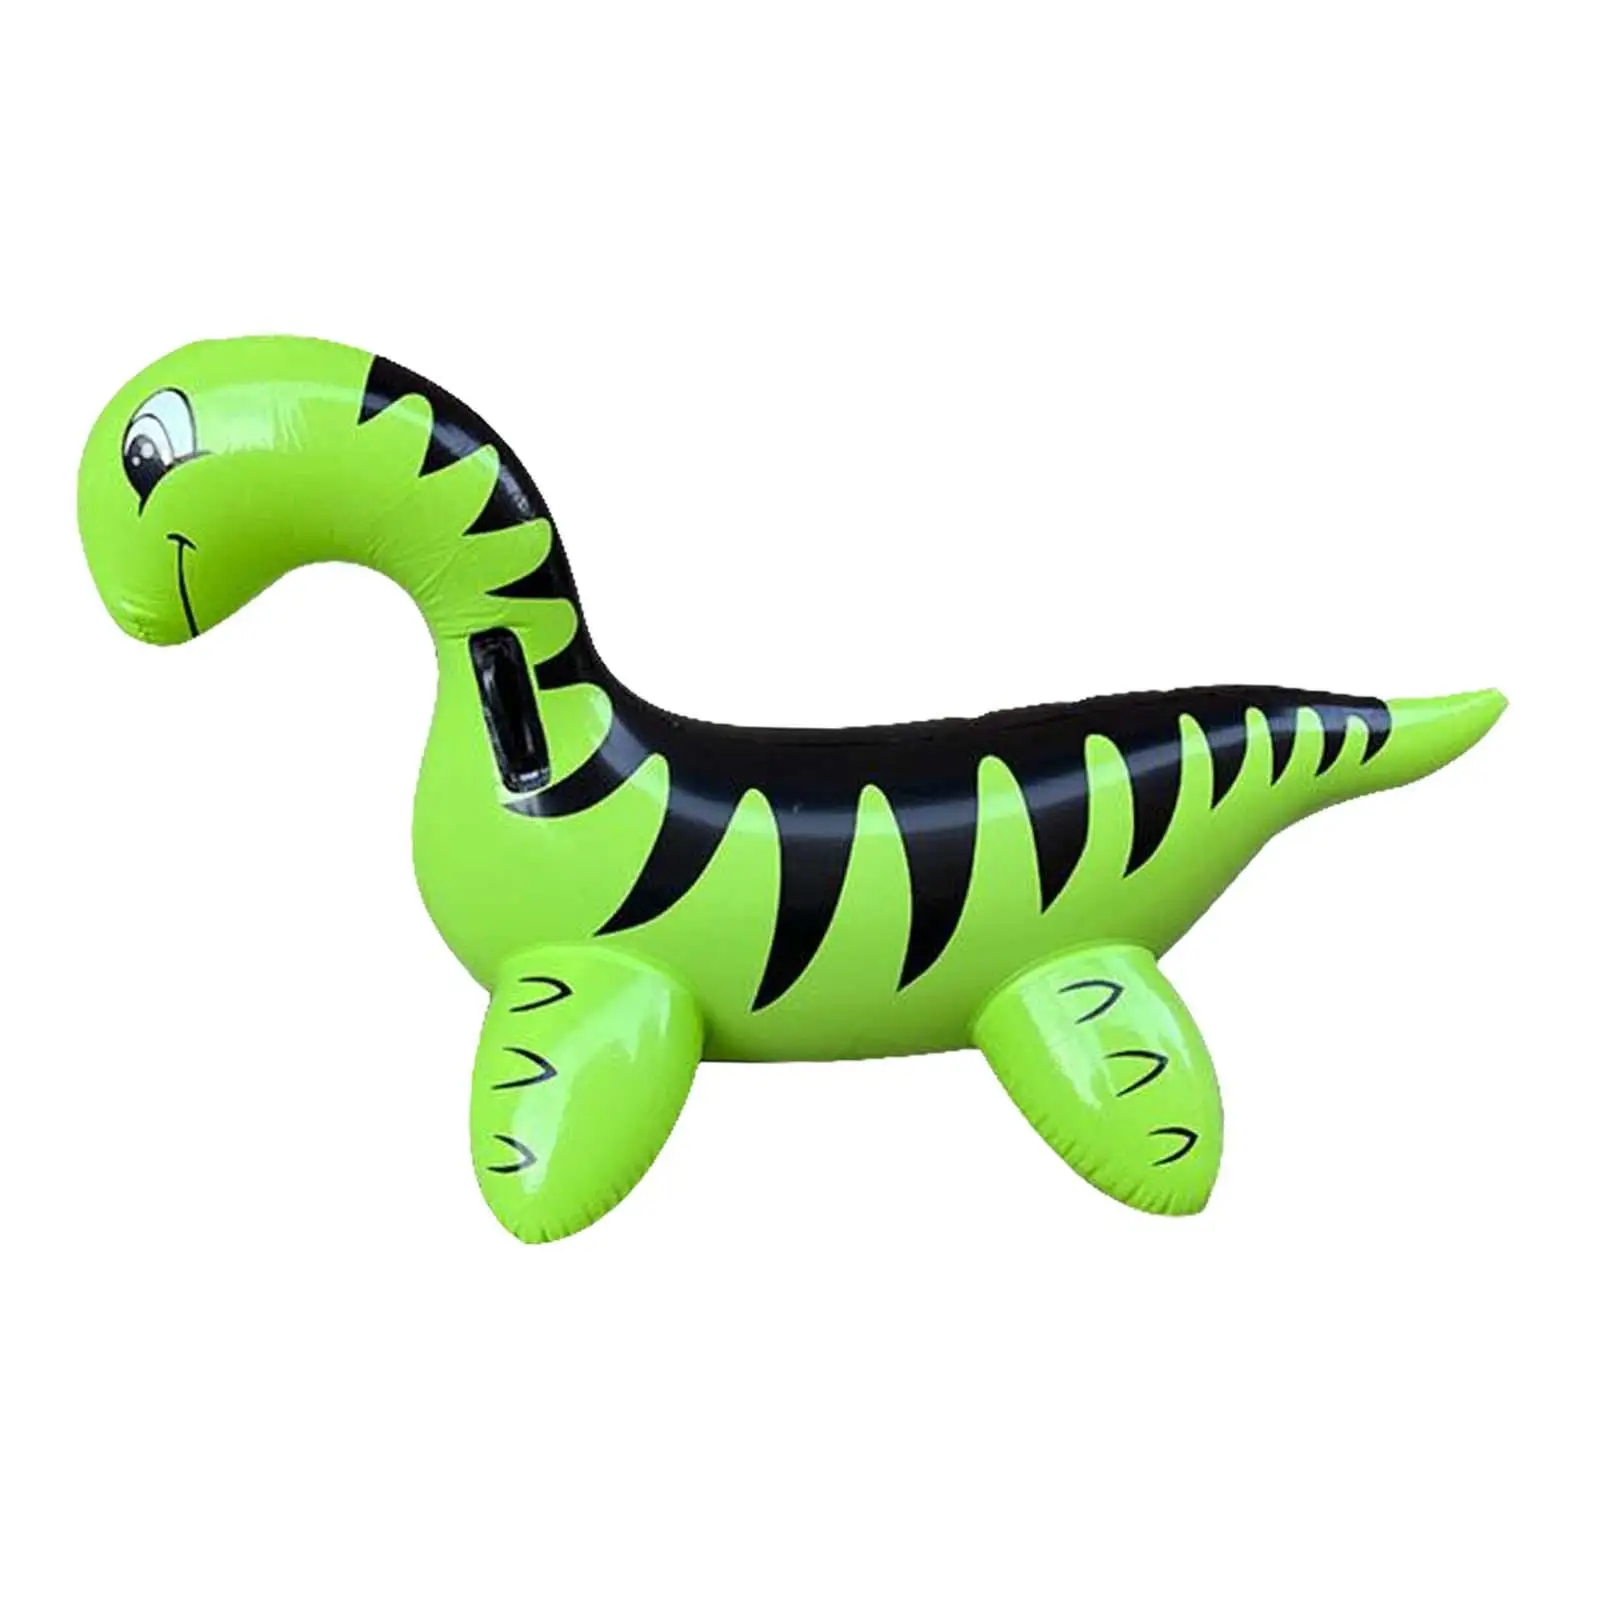 Dinosaur Pool Floats Water Games Pool Inflated Float Beach Float Floating Raft for Party Supplies summer Adults Boys Girls